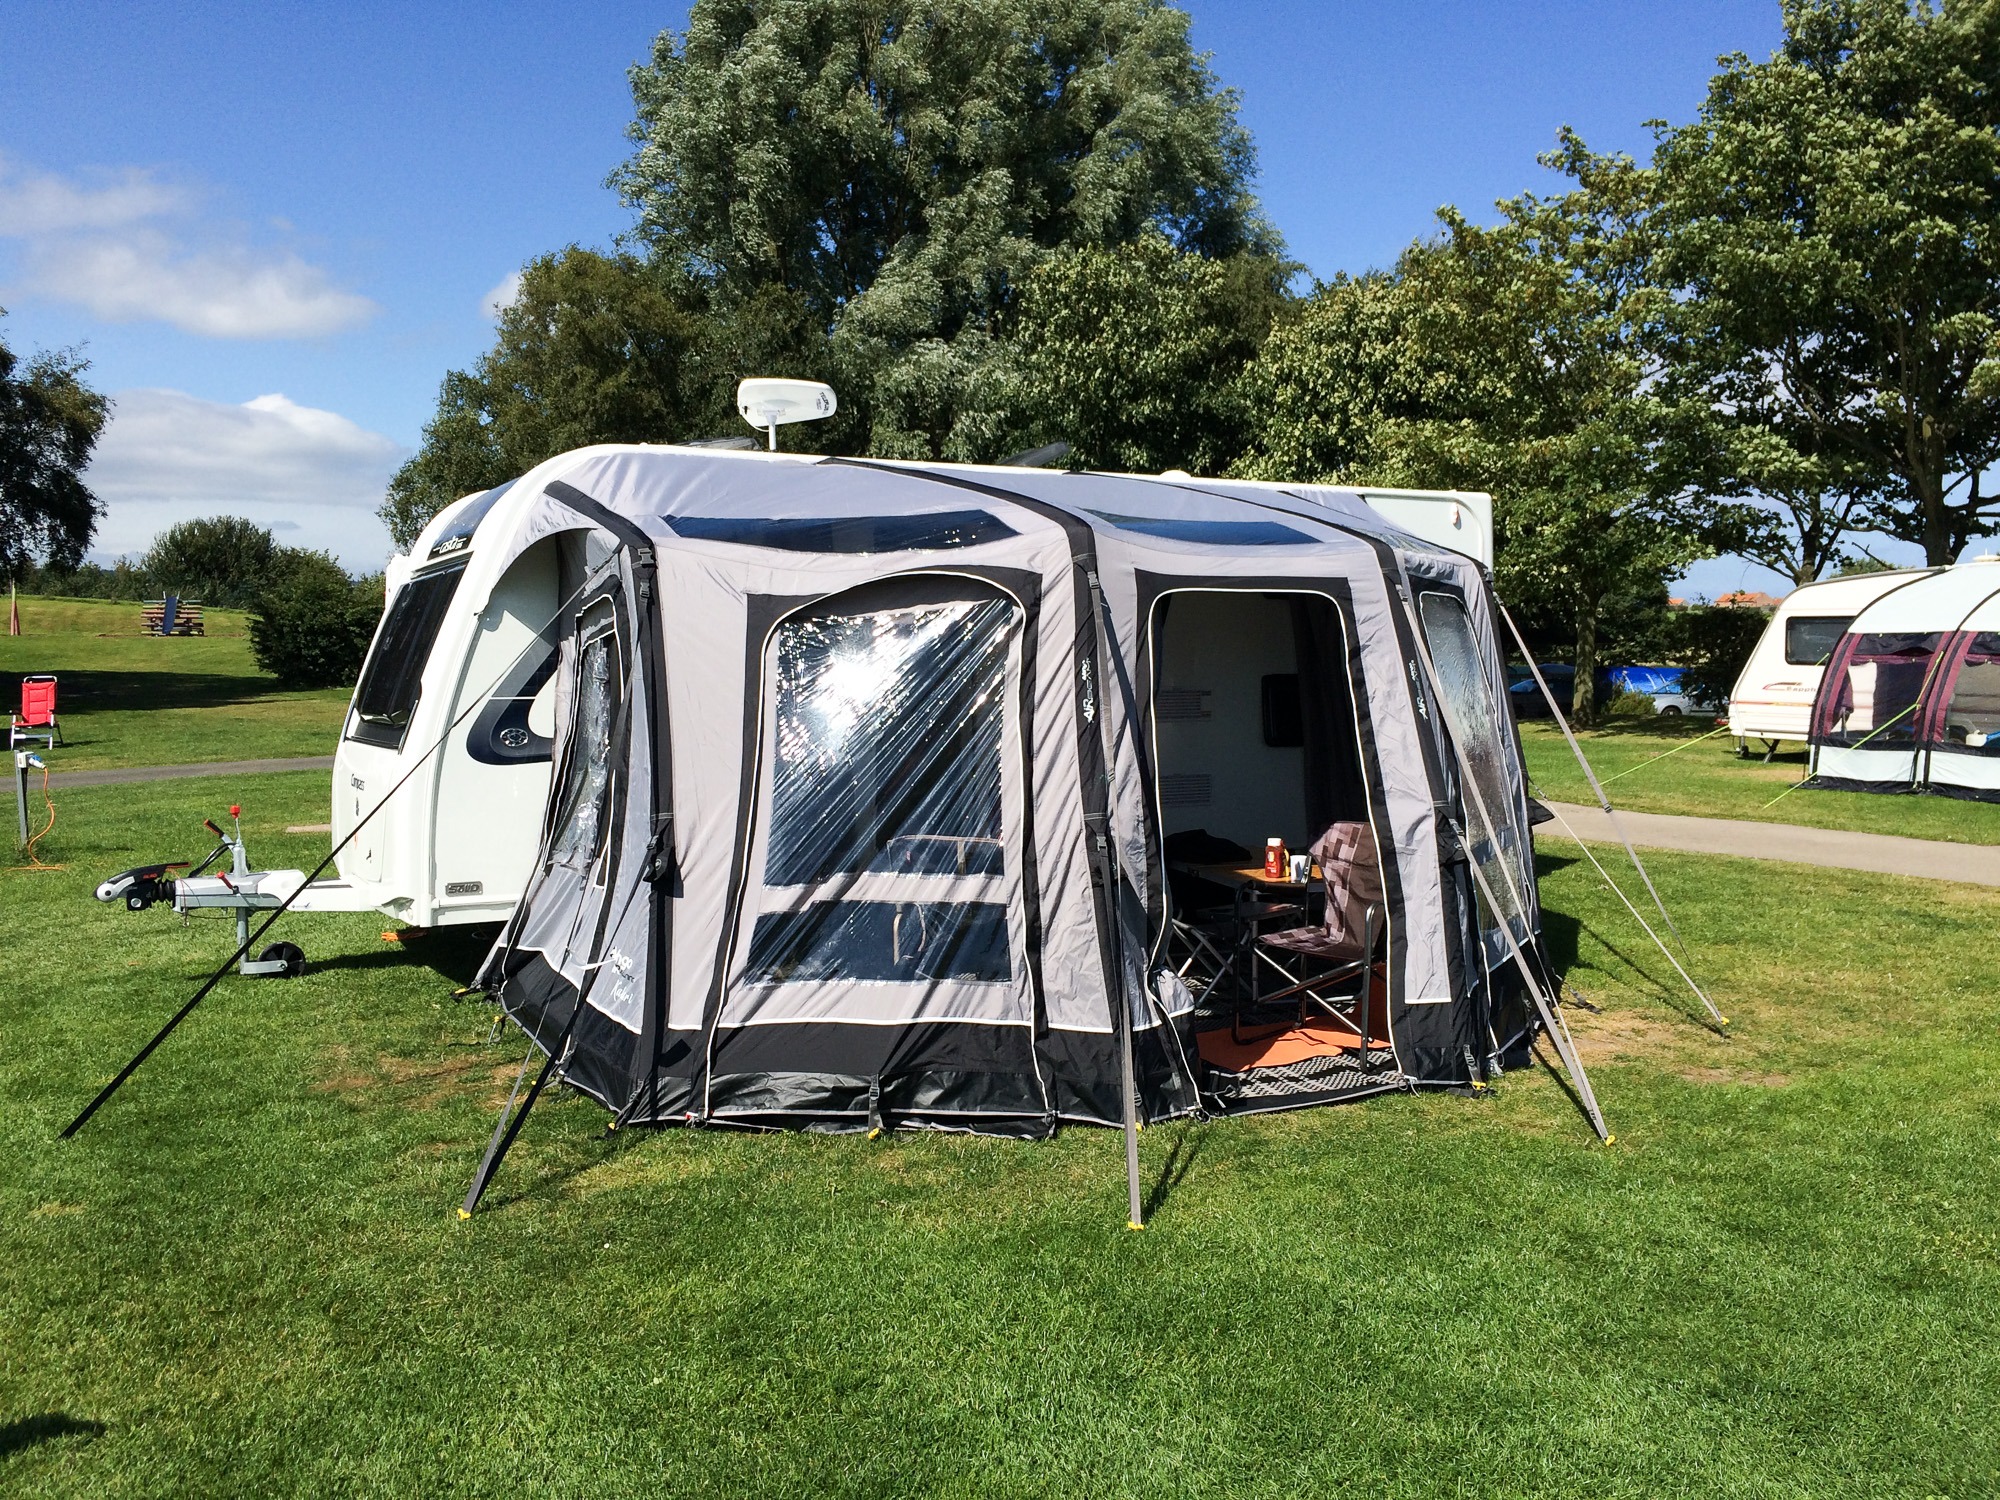 Pitched at Scarborough Campsite